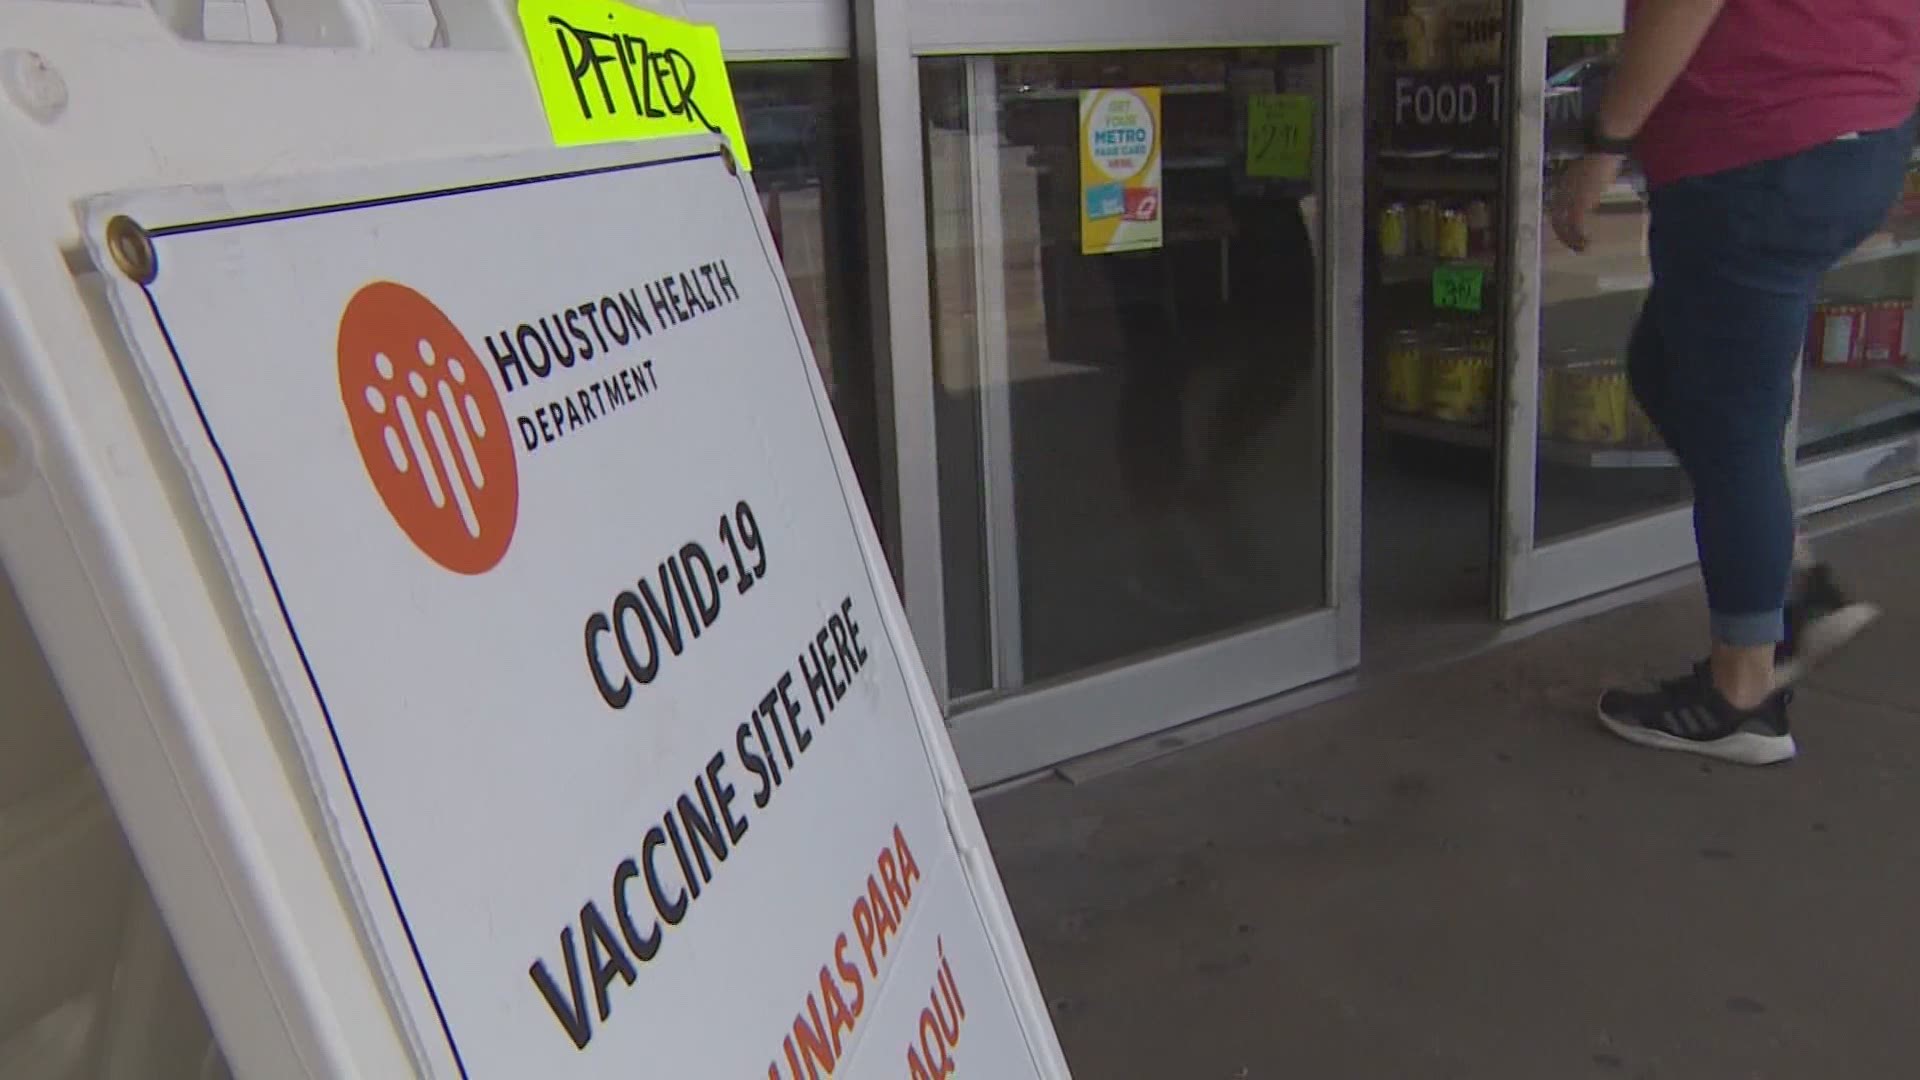 Houston and Harris County health departments are using mobile vaccination sites to boost access to the COVID-19 shot.